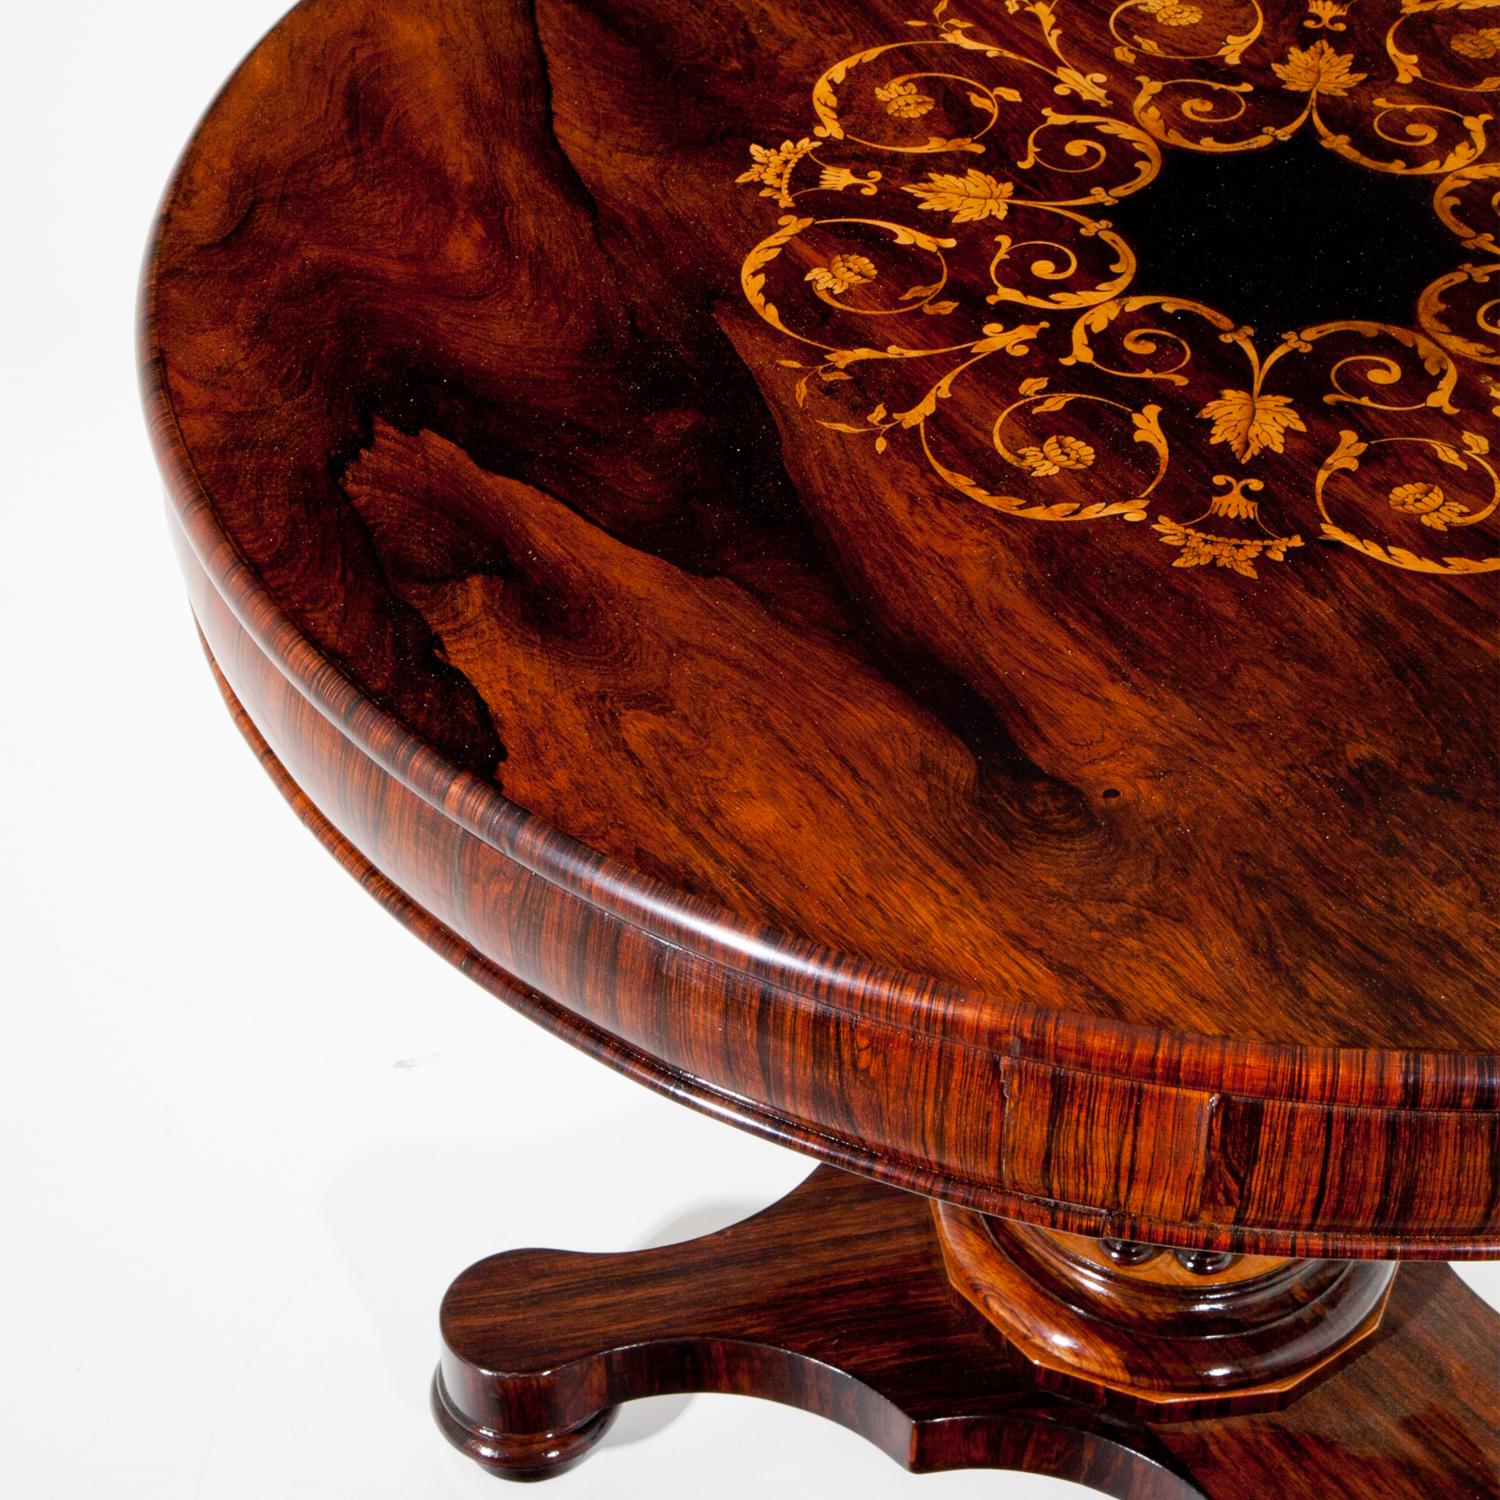 Low Biedermeier salon table standing on a trefoil base, the round tabletop shows vine inlays and three-quarter columns surround the Stand. Very beautiful veneer pattern. The table was professionally refurbished and hand-polished.